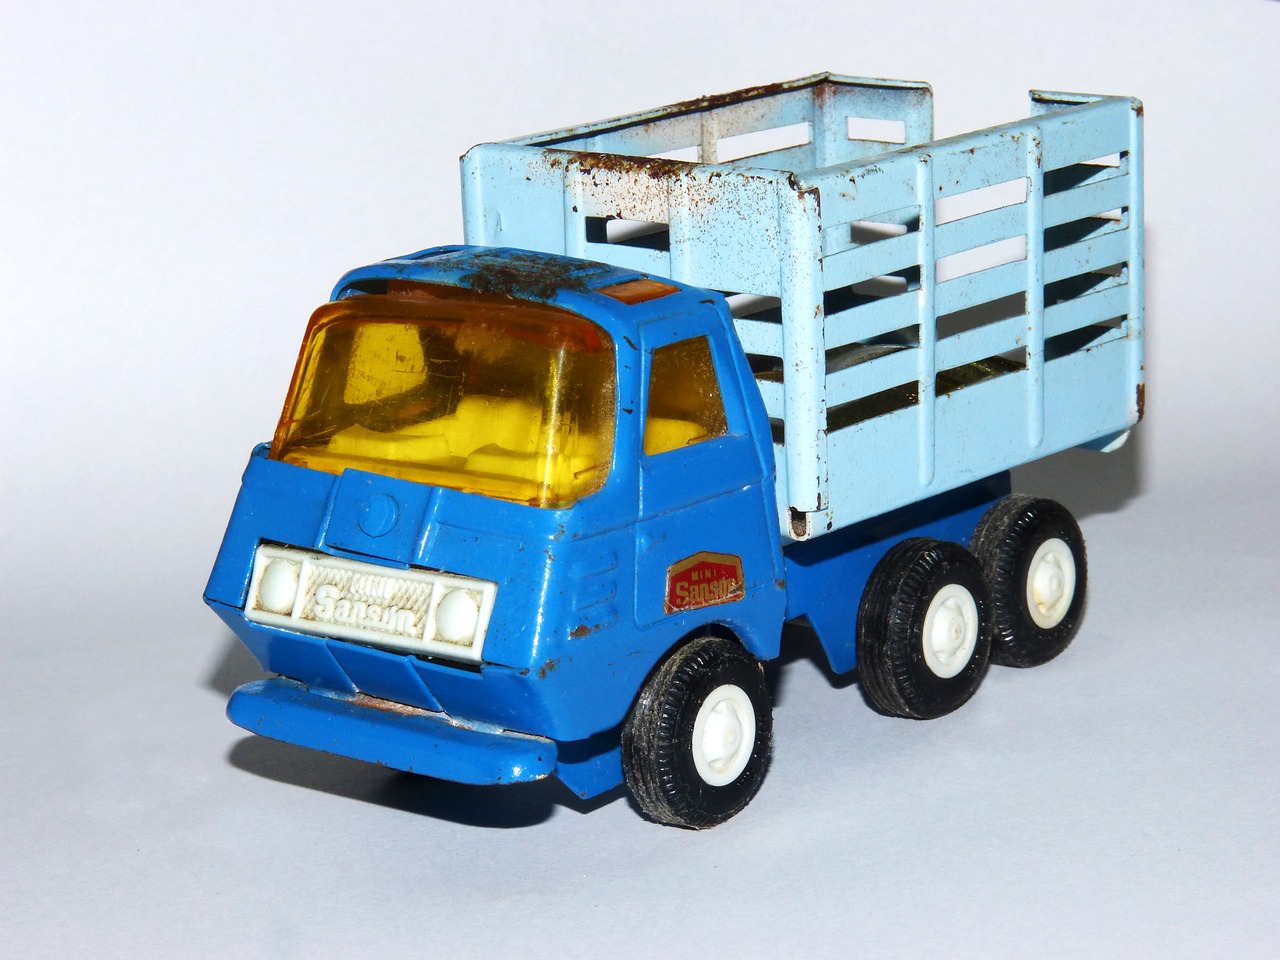 antique toy toy truck vintage free photo